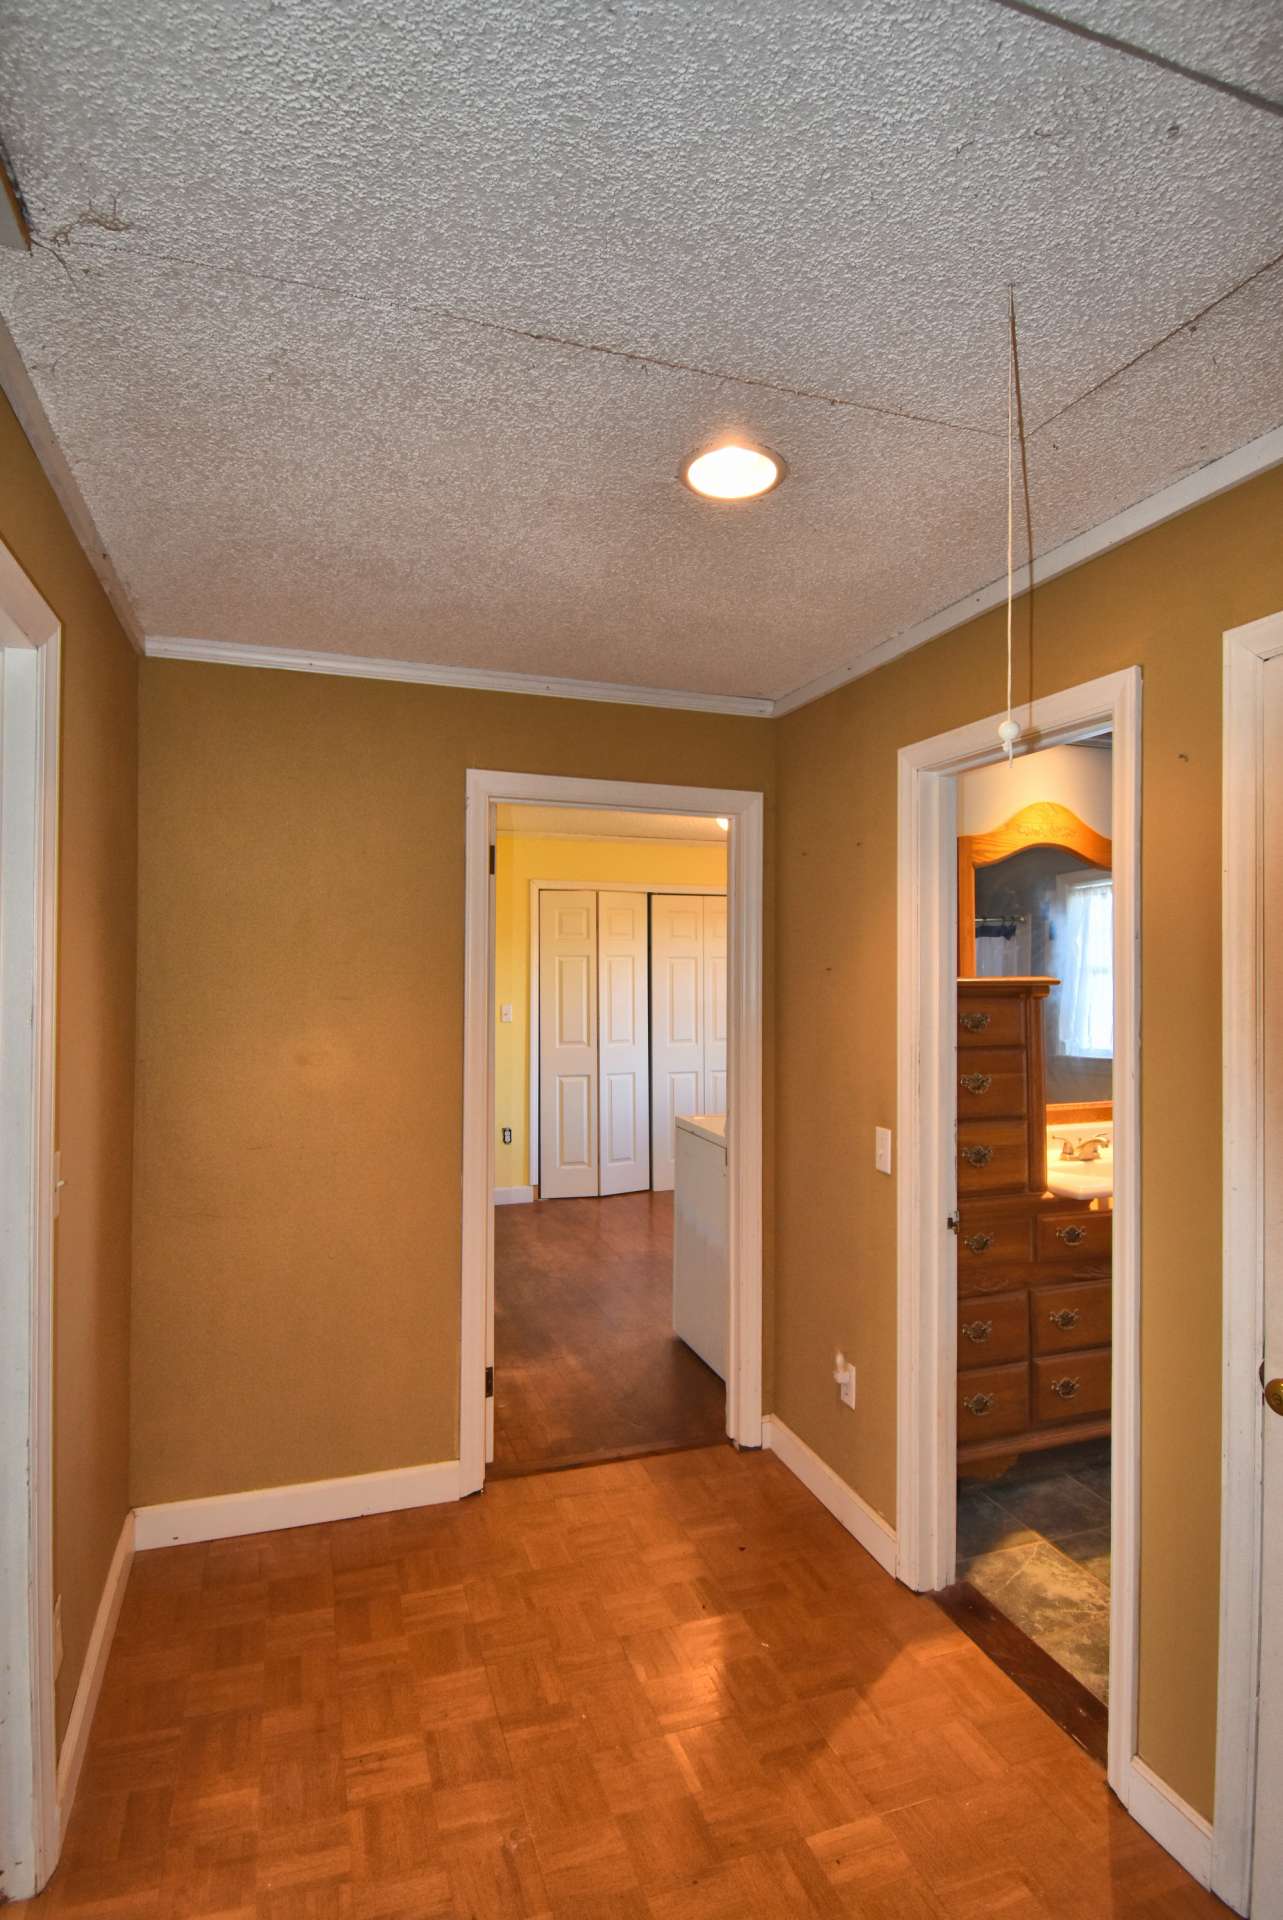 This hallway off of the dining area accesses the full bath and the two bedrooms.